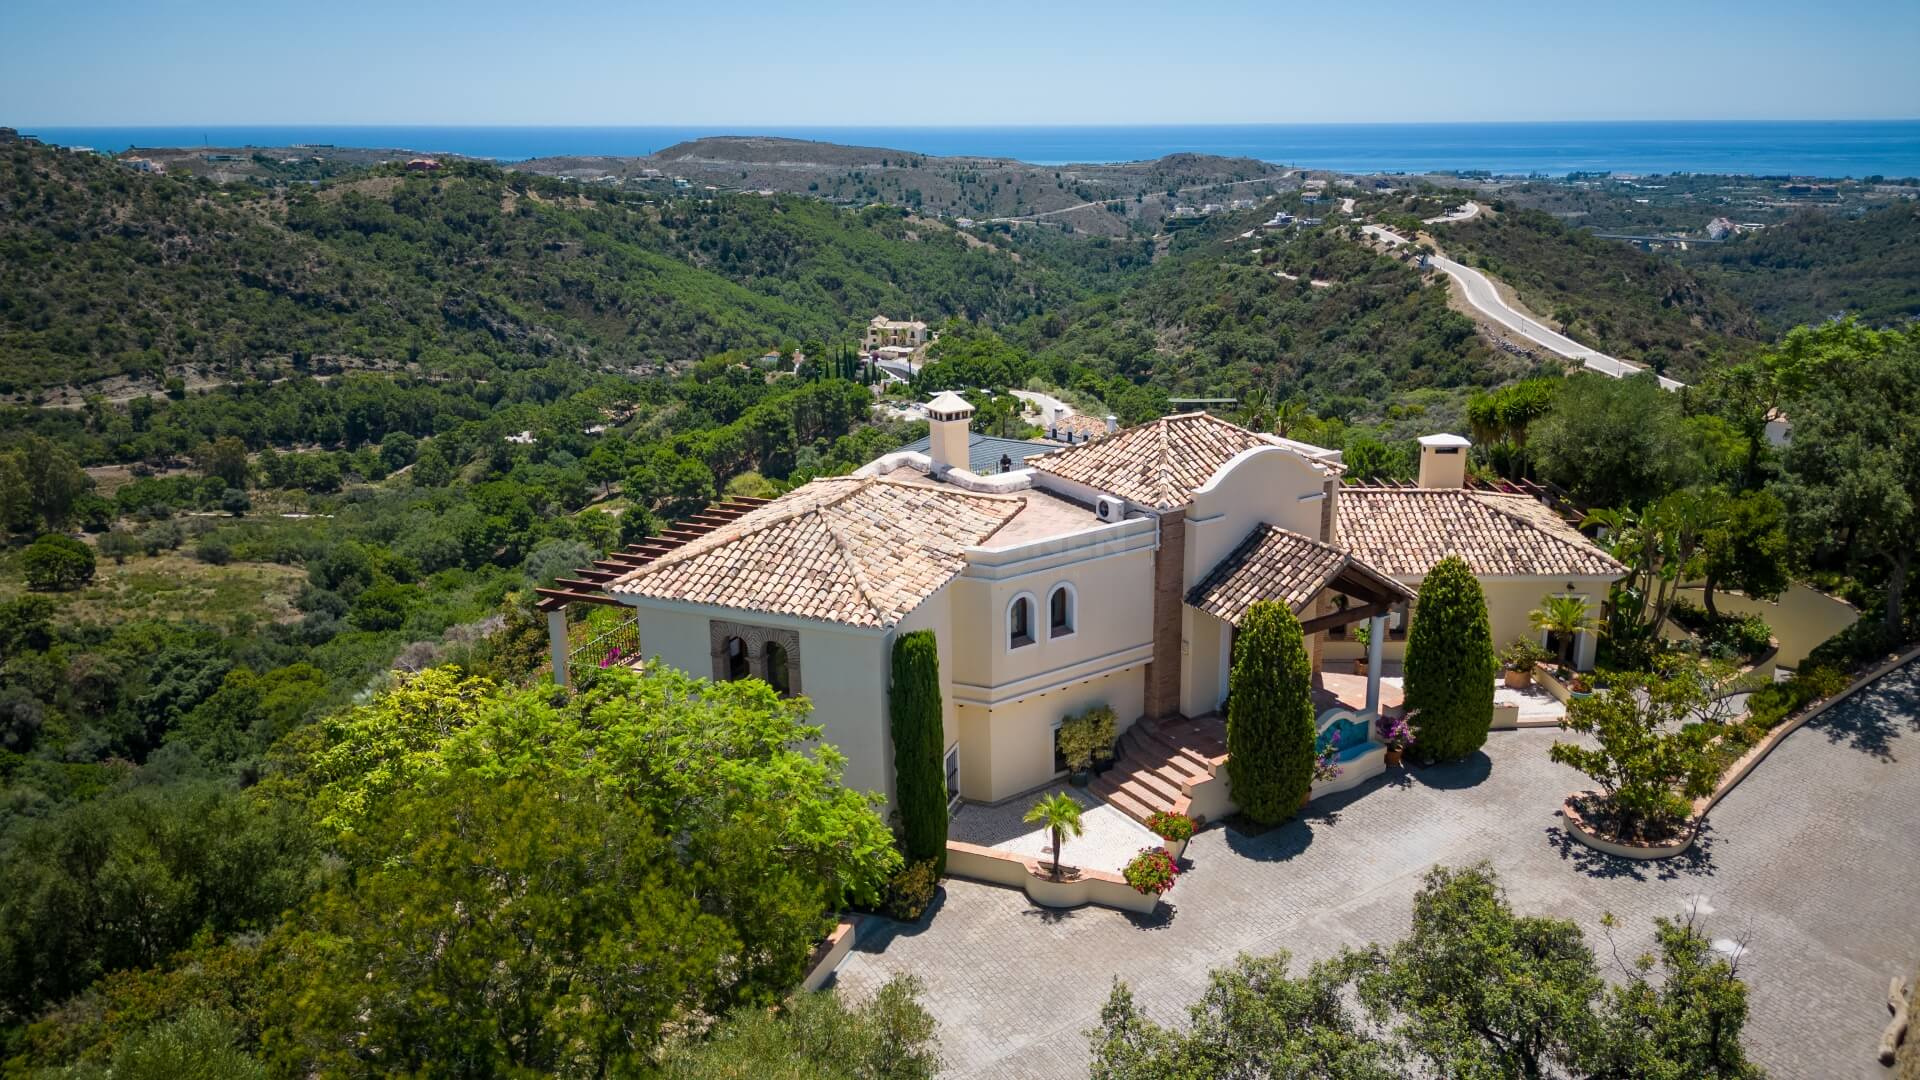 Charming detached villa with breathtaking views of the Mediterranean